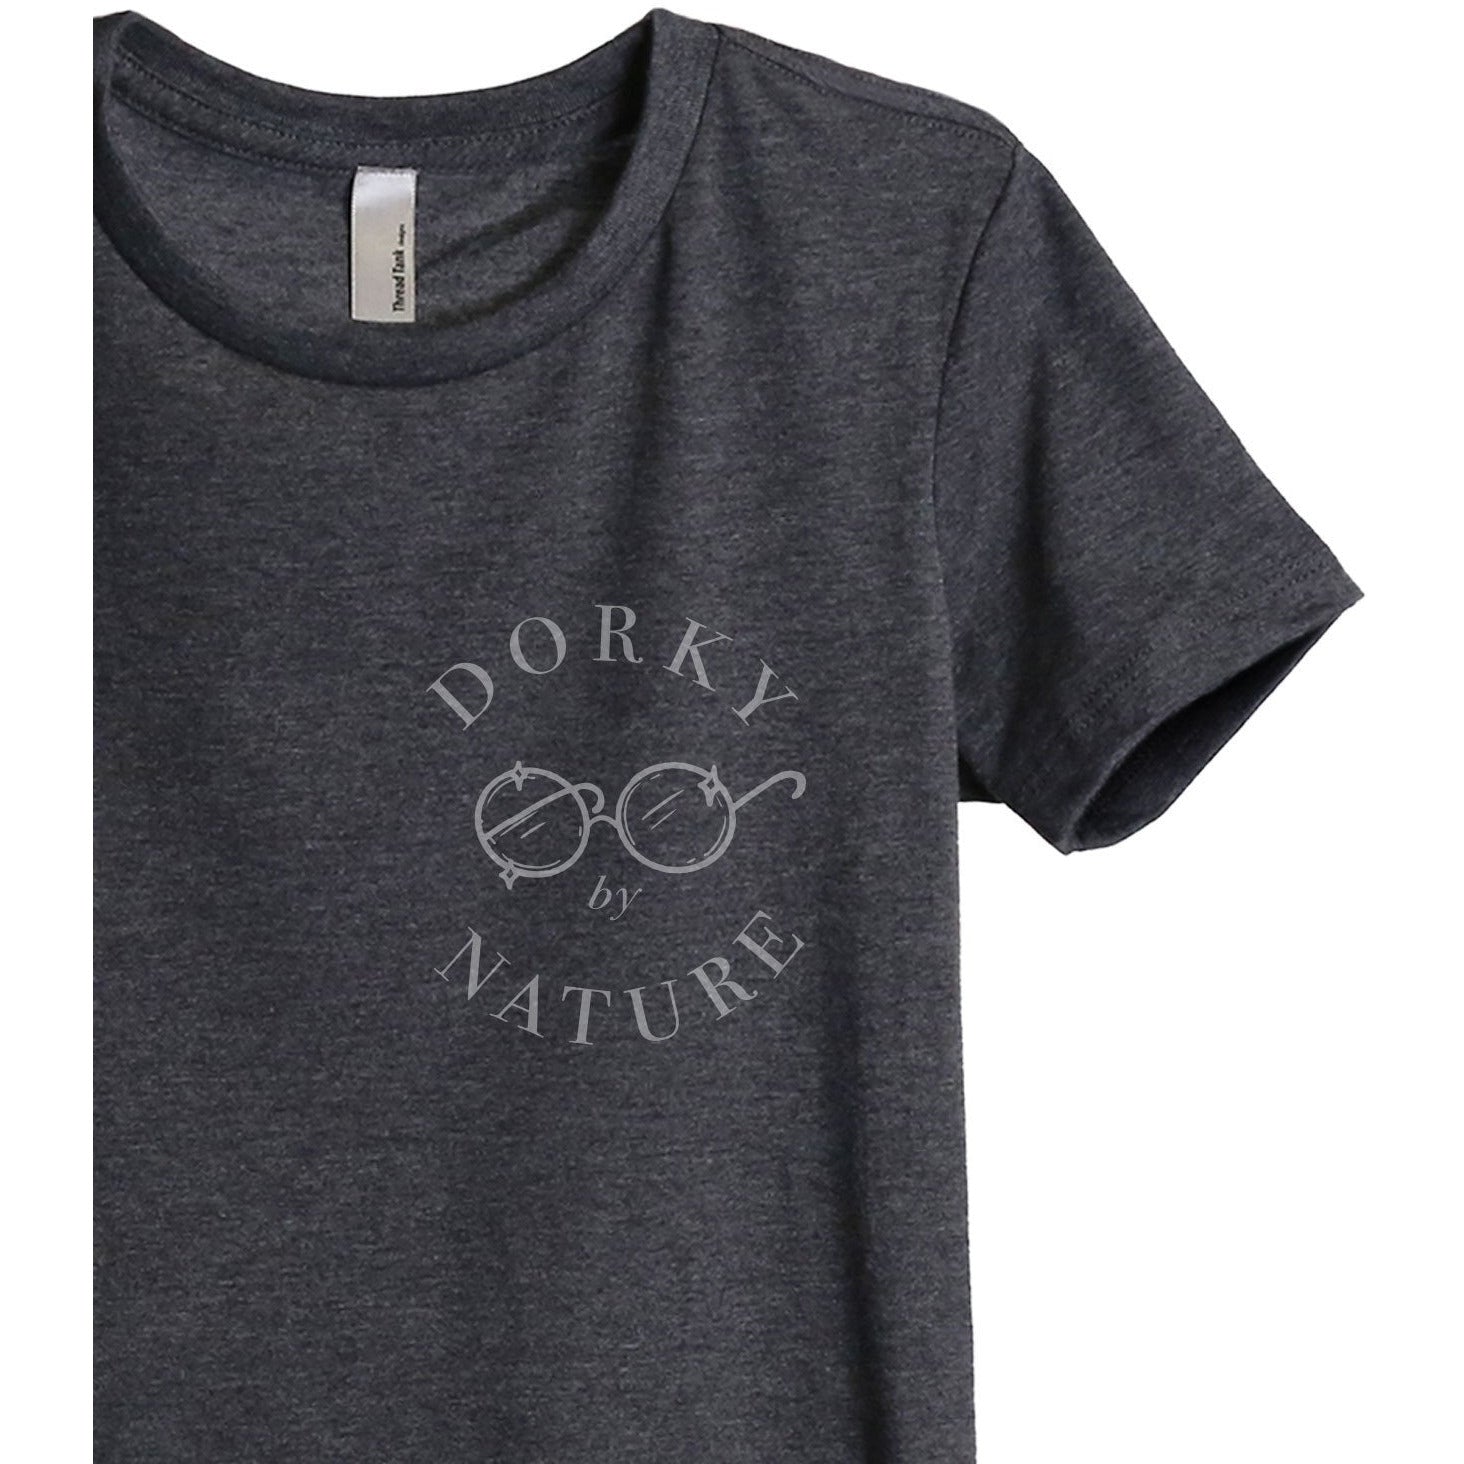 Dorky By Nature Women's Relaxed Crewneck T-Shirt Top Tee Charcoal Grey Zoom Details